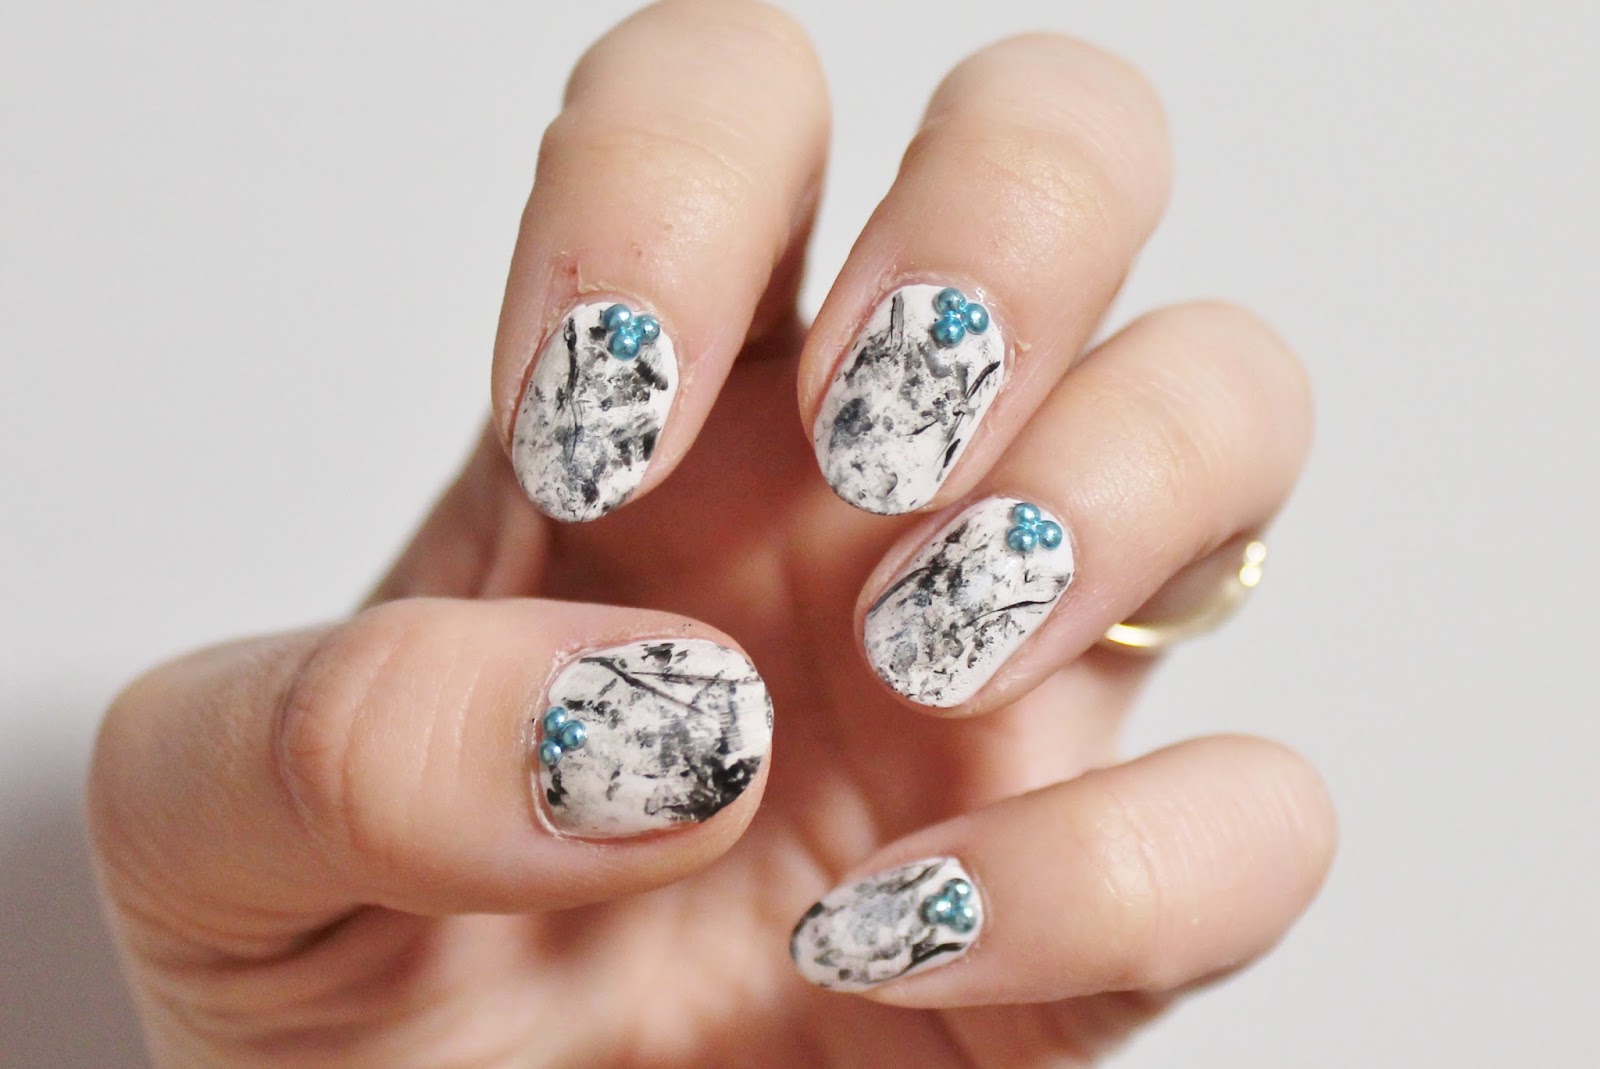 6. "Green and Blue Marble Nail Art Design" - wide 4